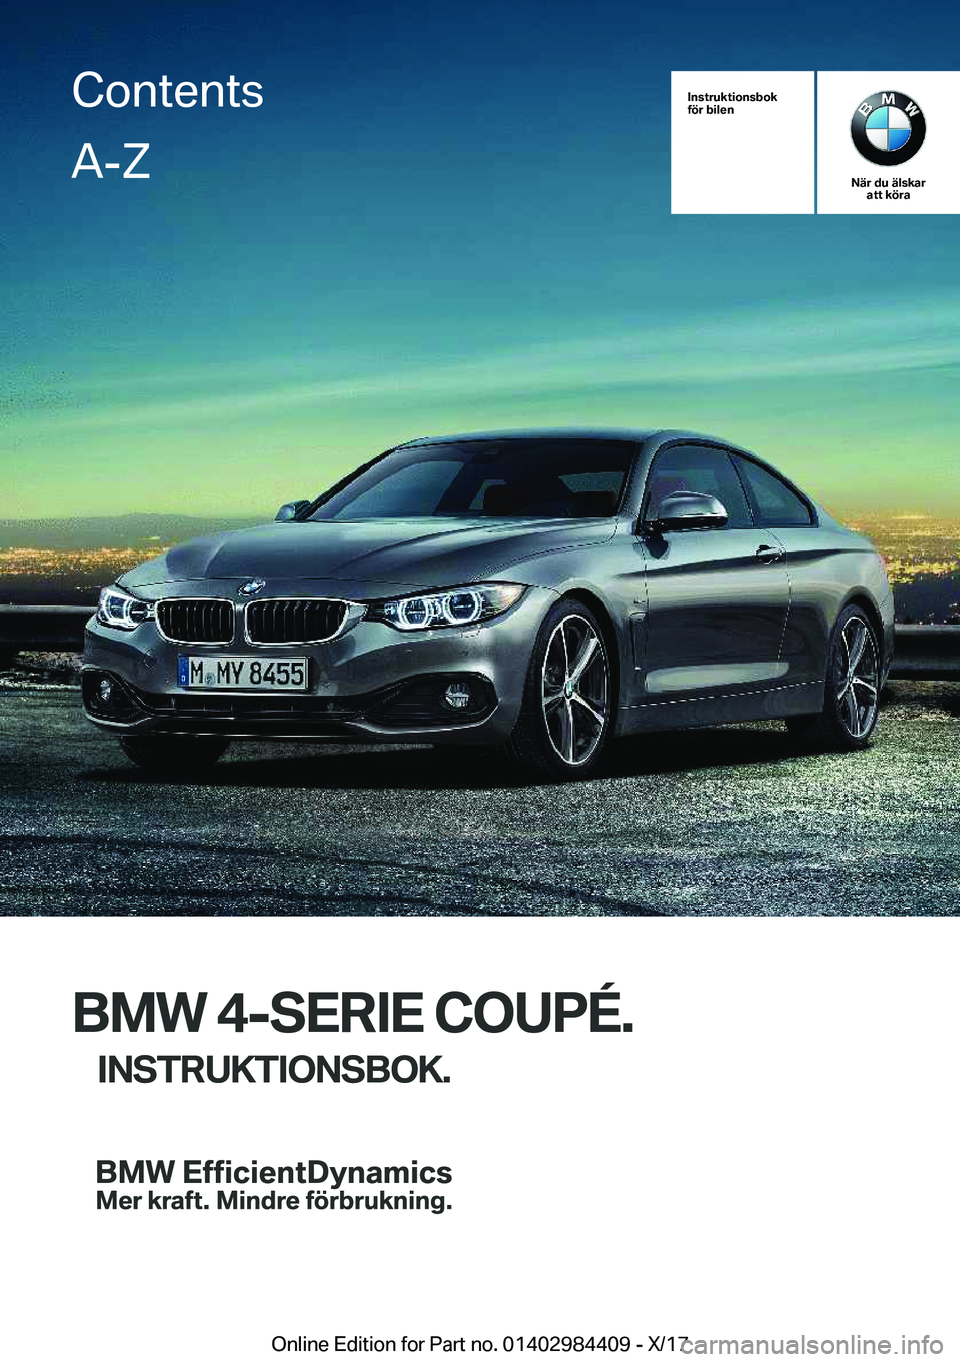 BMW 4 SERIES COUPE 2018  InstruktionsbÖcker (in Swedish) �I�n�s�t�r�u�k�t�i�o�n�s�b�o�k
�f�